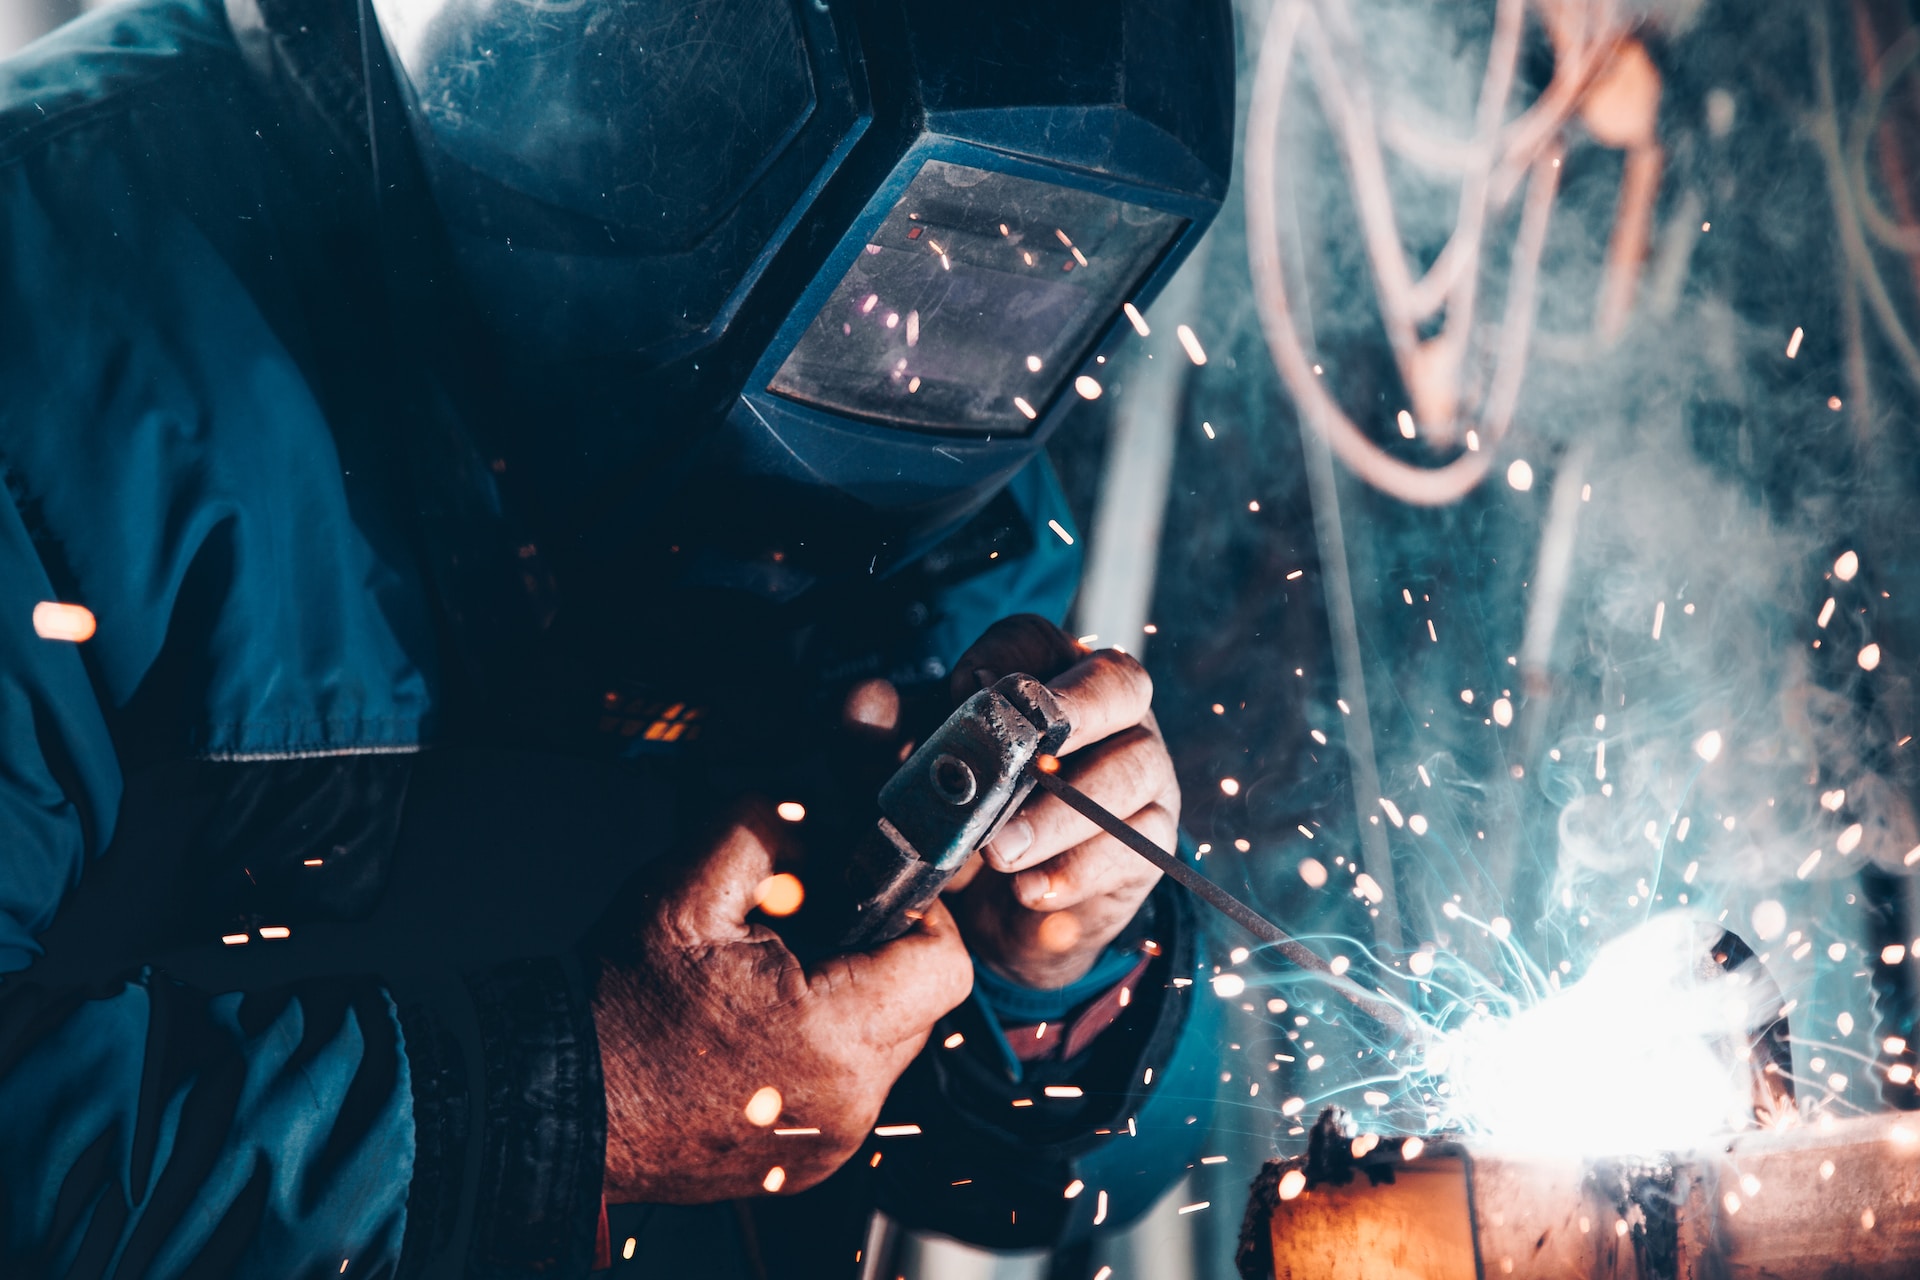 The Machining Industry Has Its Own Set of Safety Requirements